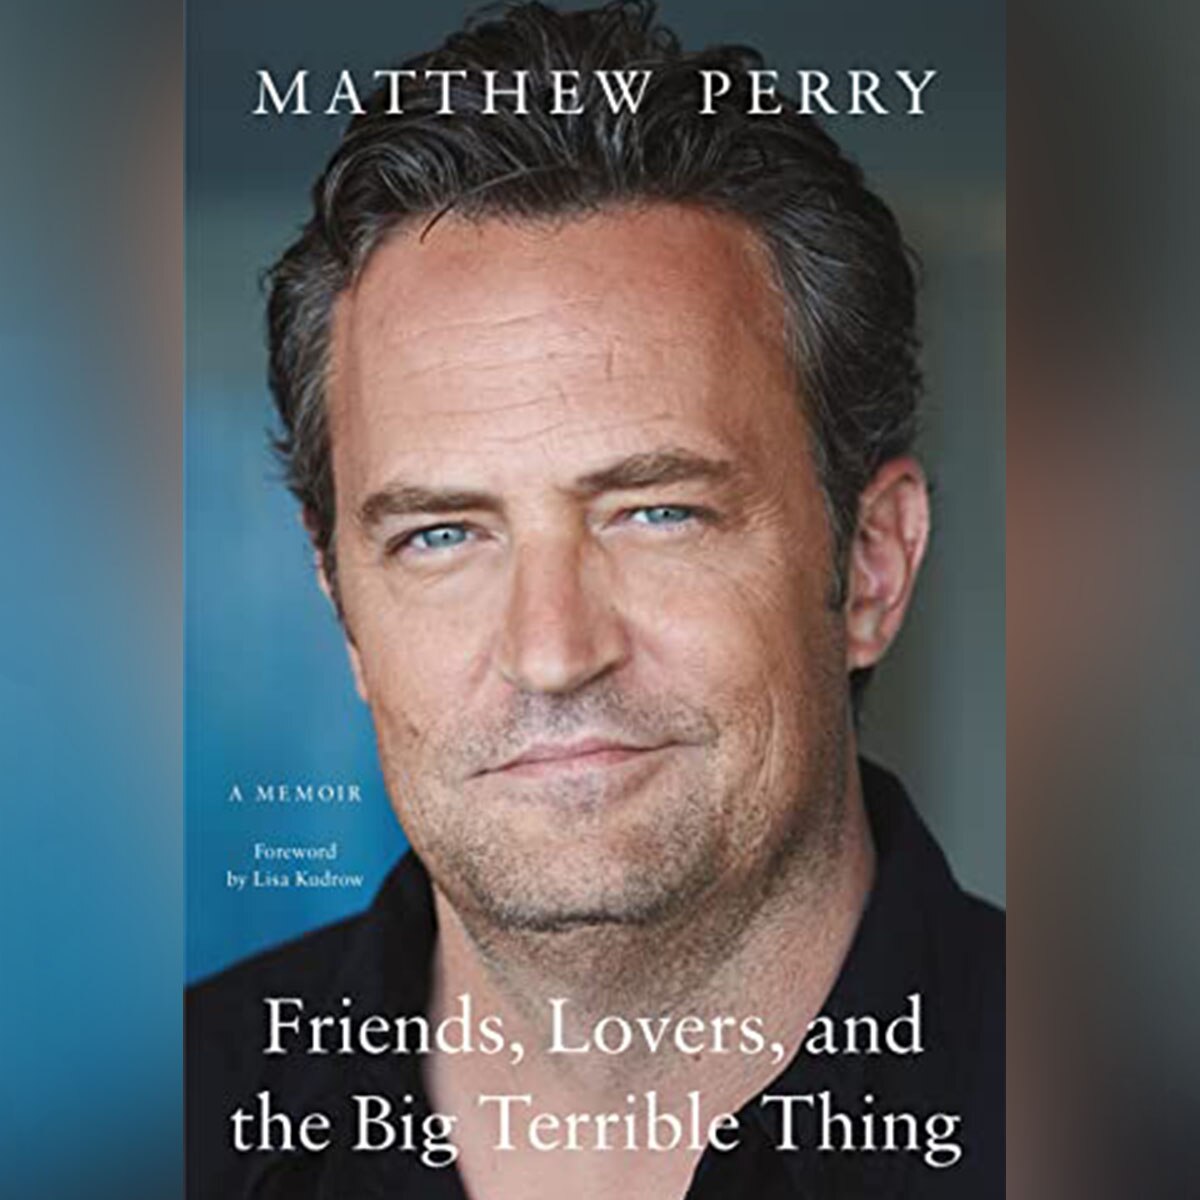 Matthew Perrys Memoir Provided A Look Inside His Private Struggle Wdc Tv News 7826